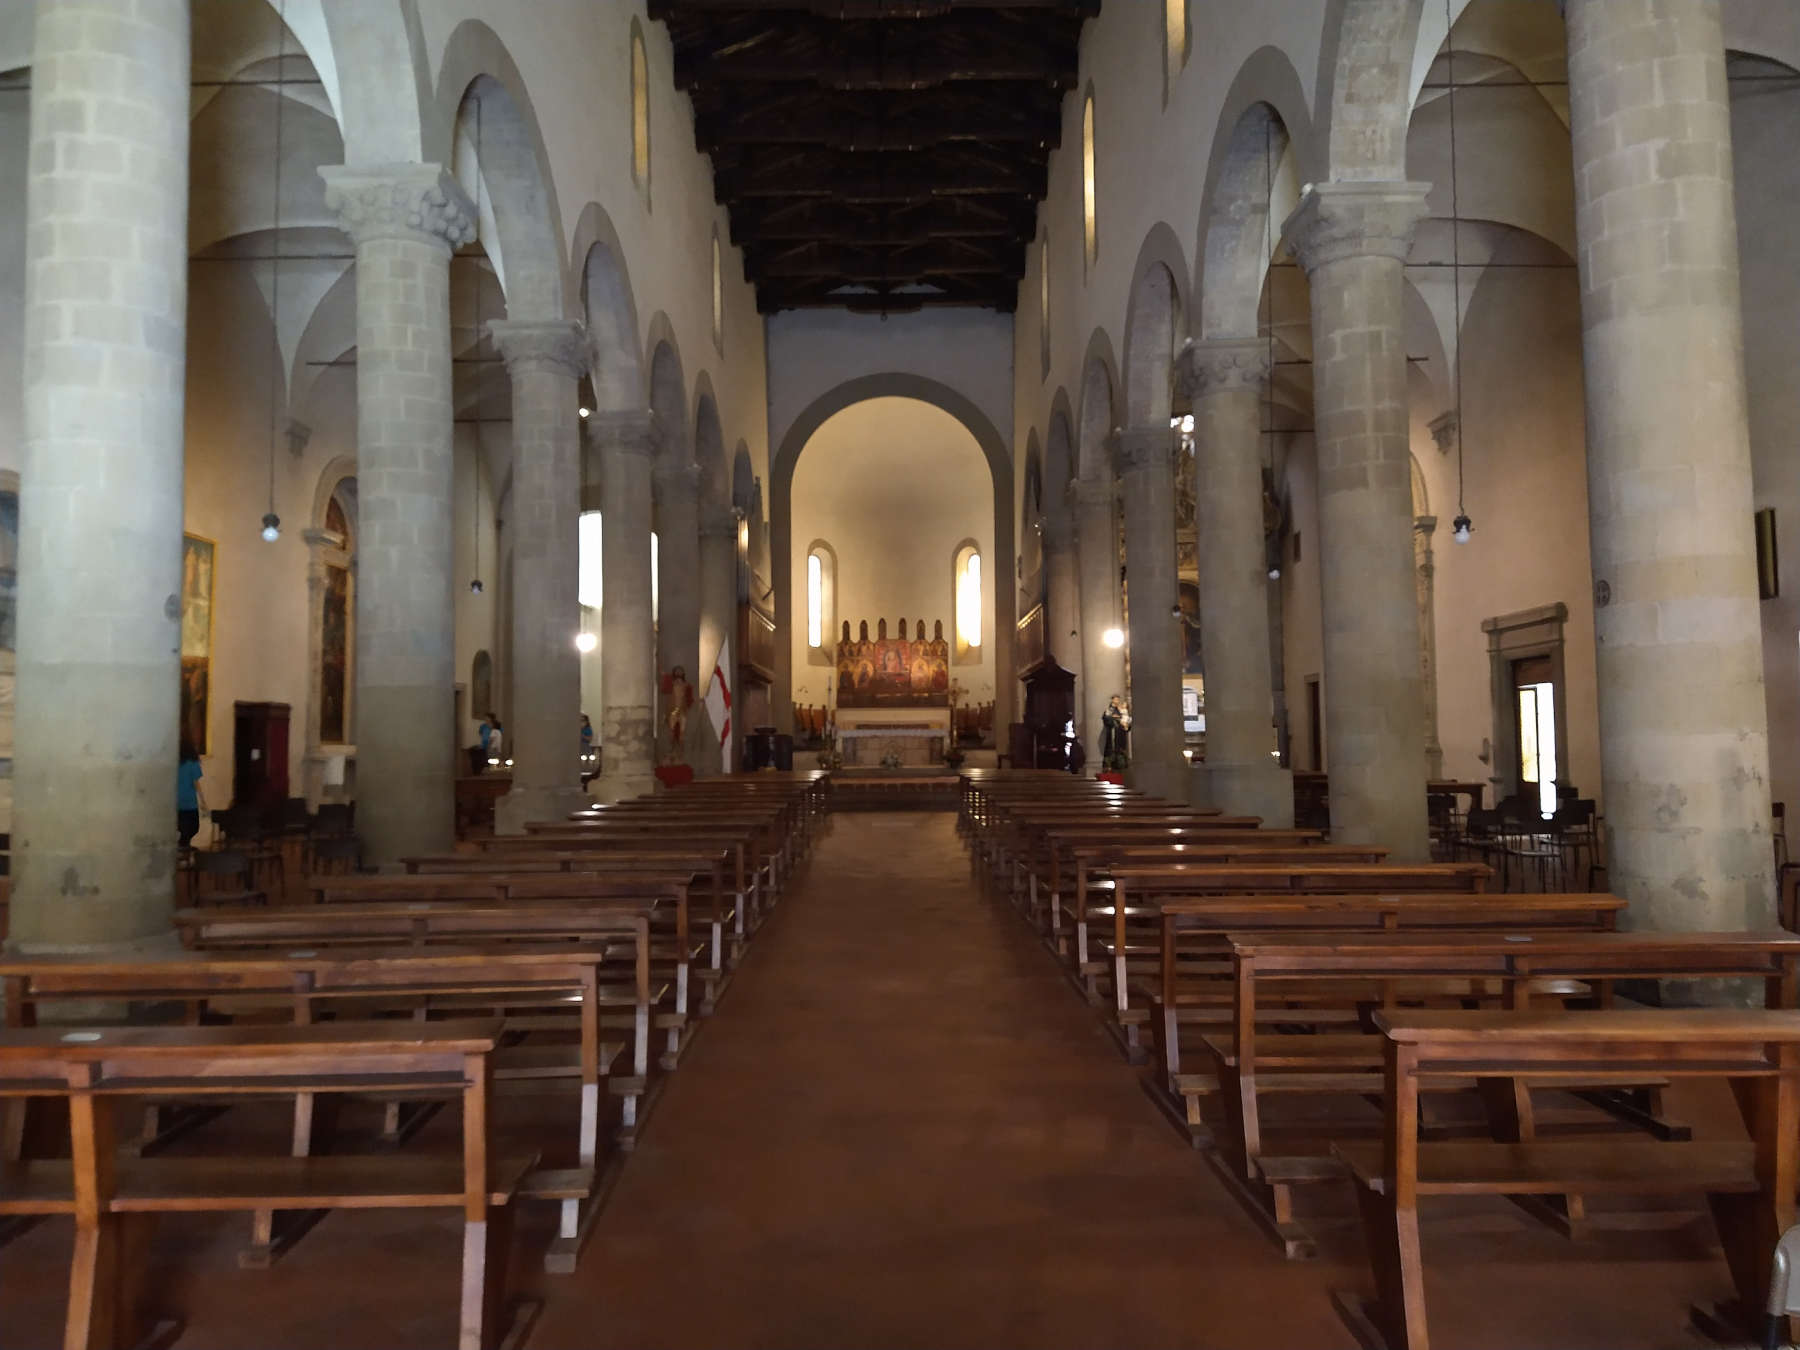 The interior of the Cathedral of Sansepolcro.